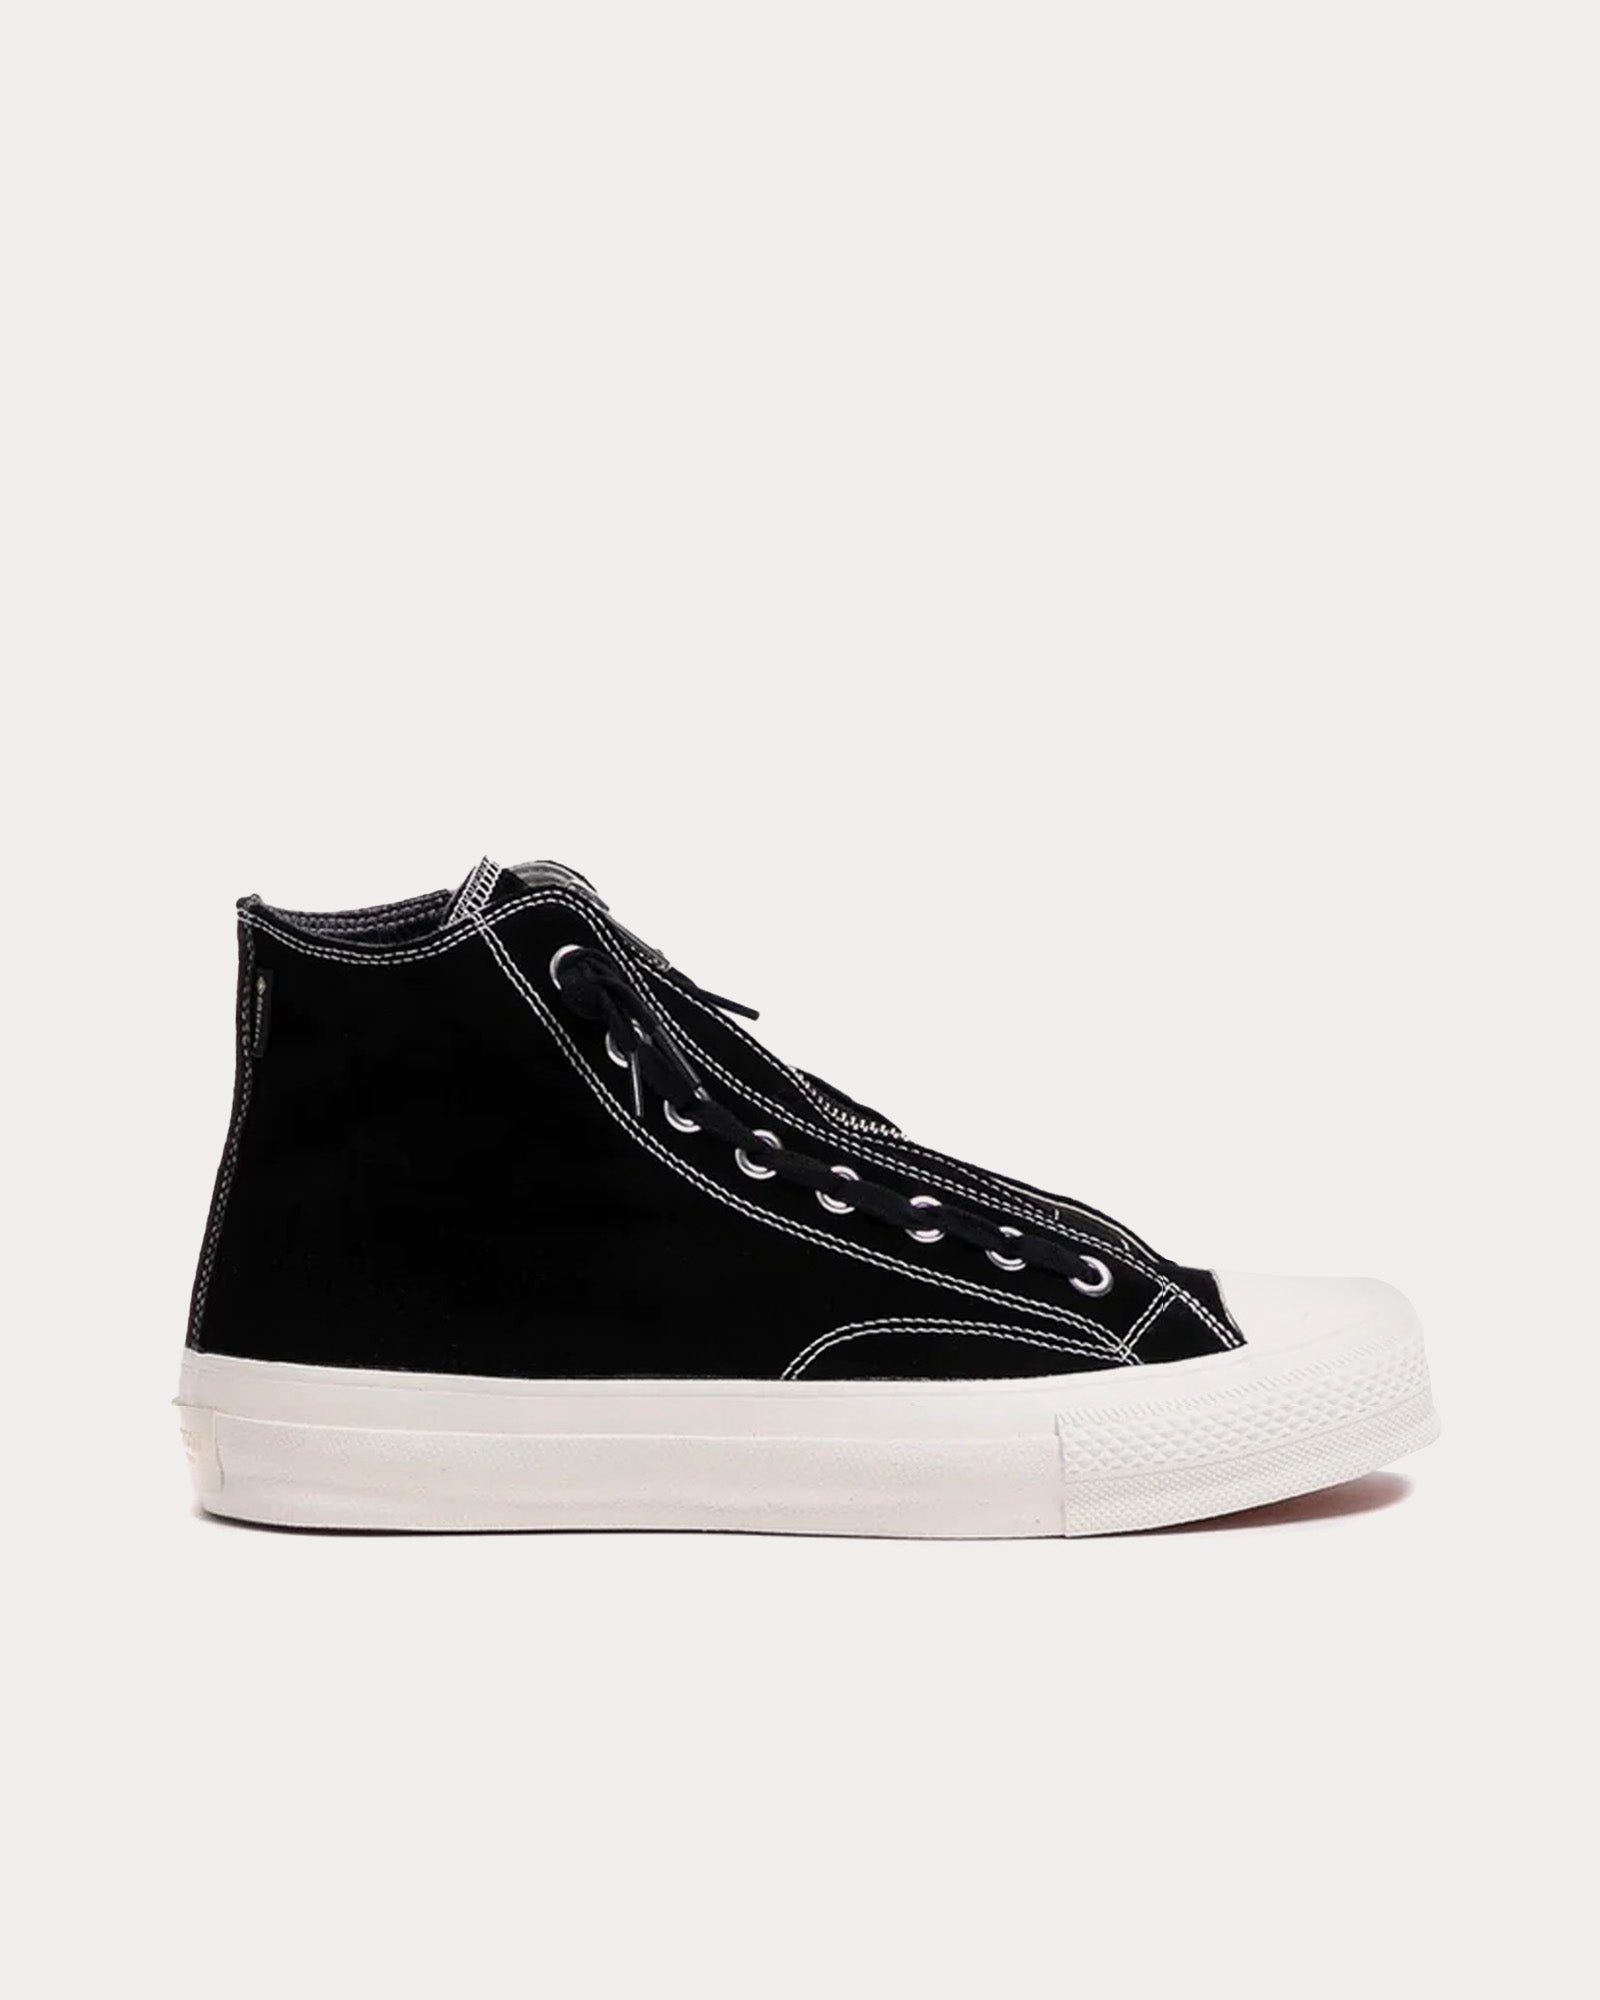 Nonnative - Dweller Hi Cow Leather with Gore-Tex Black / White High Top Sneakers